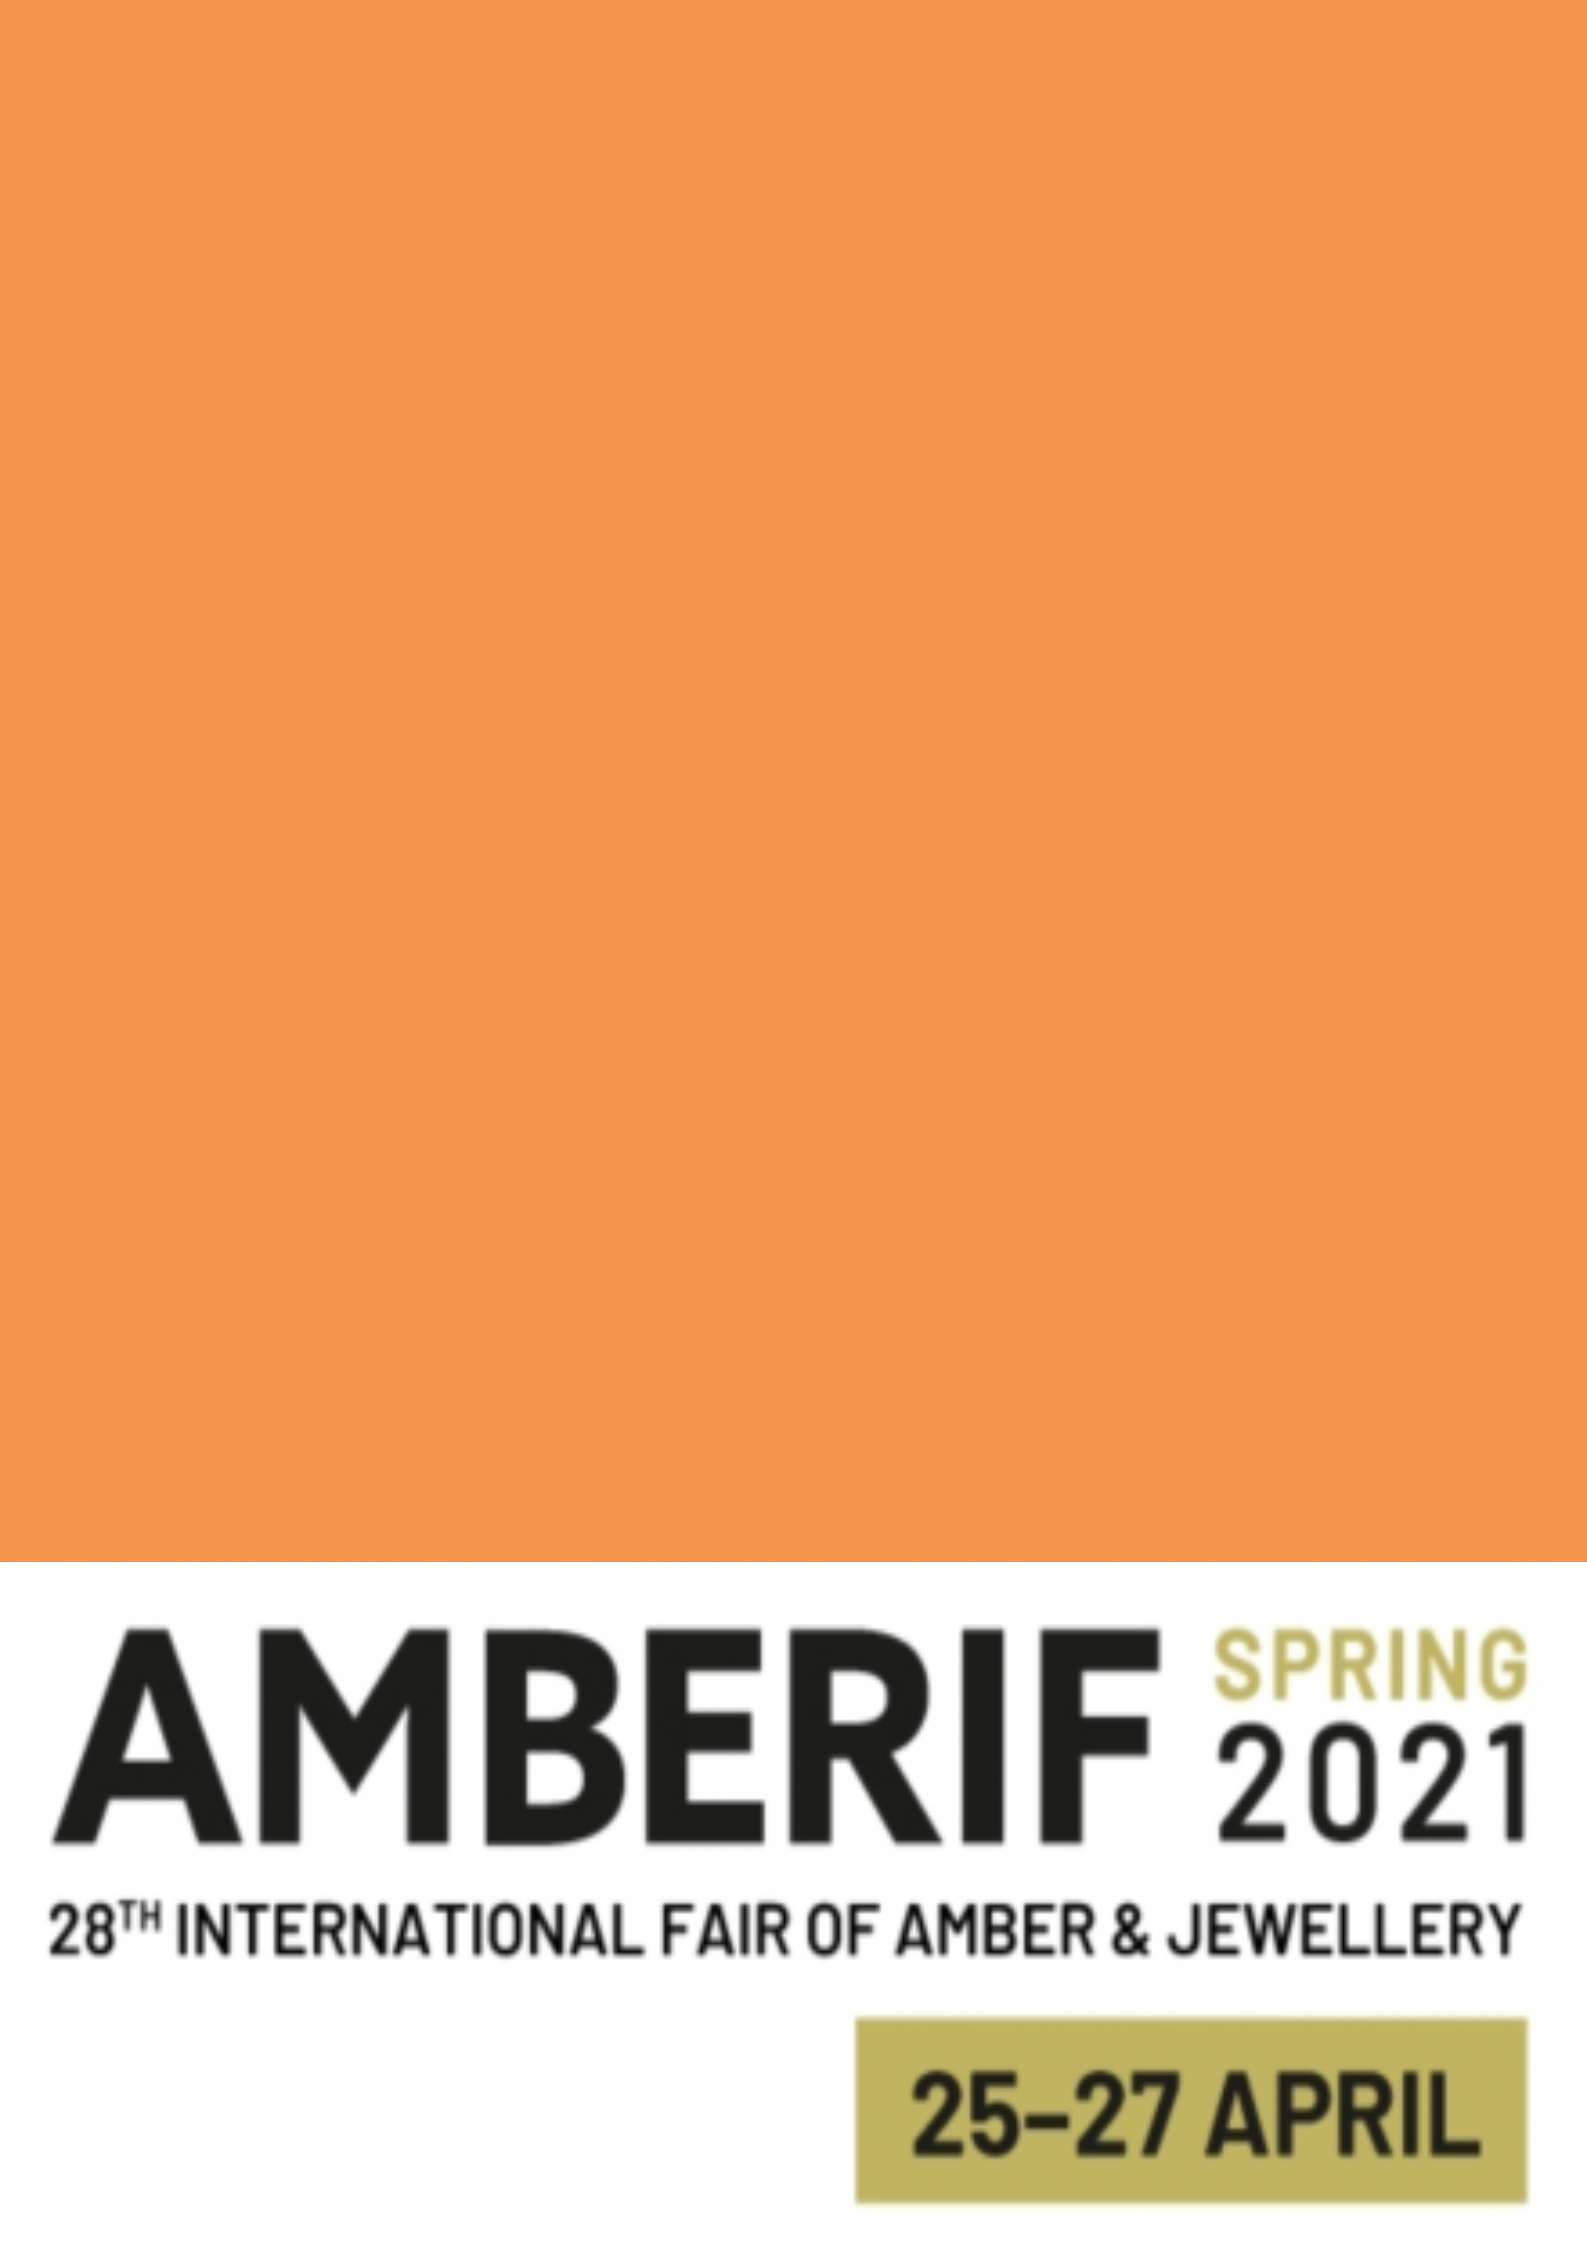 AmberIf has moved to April